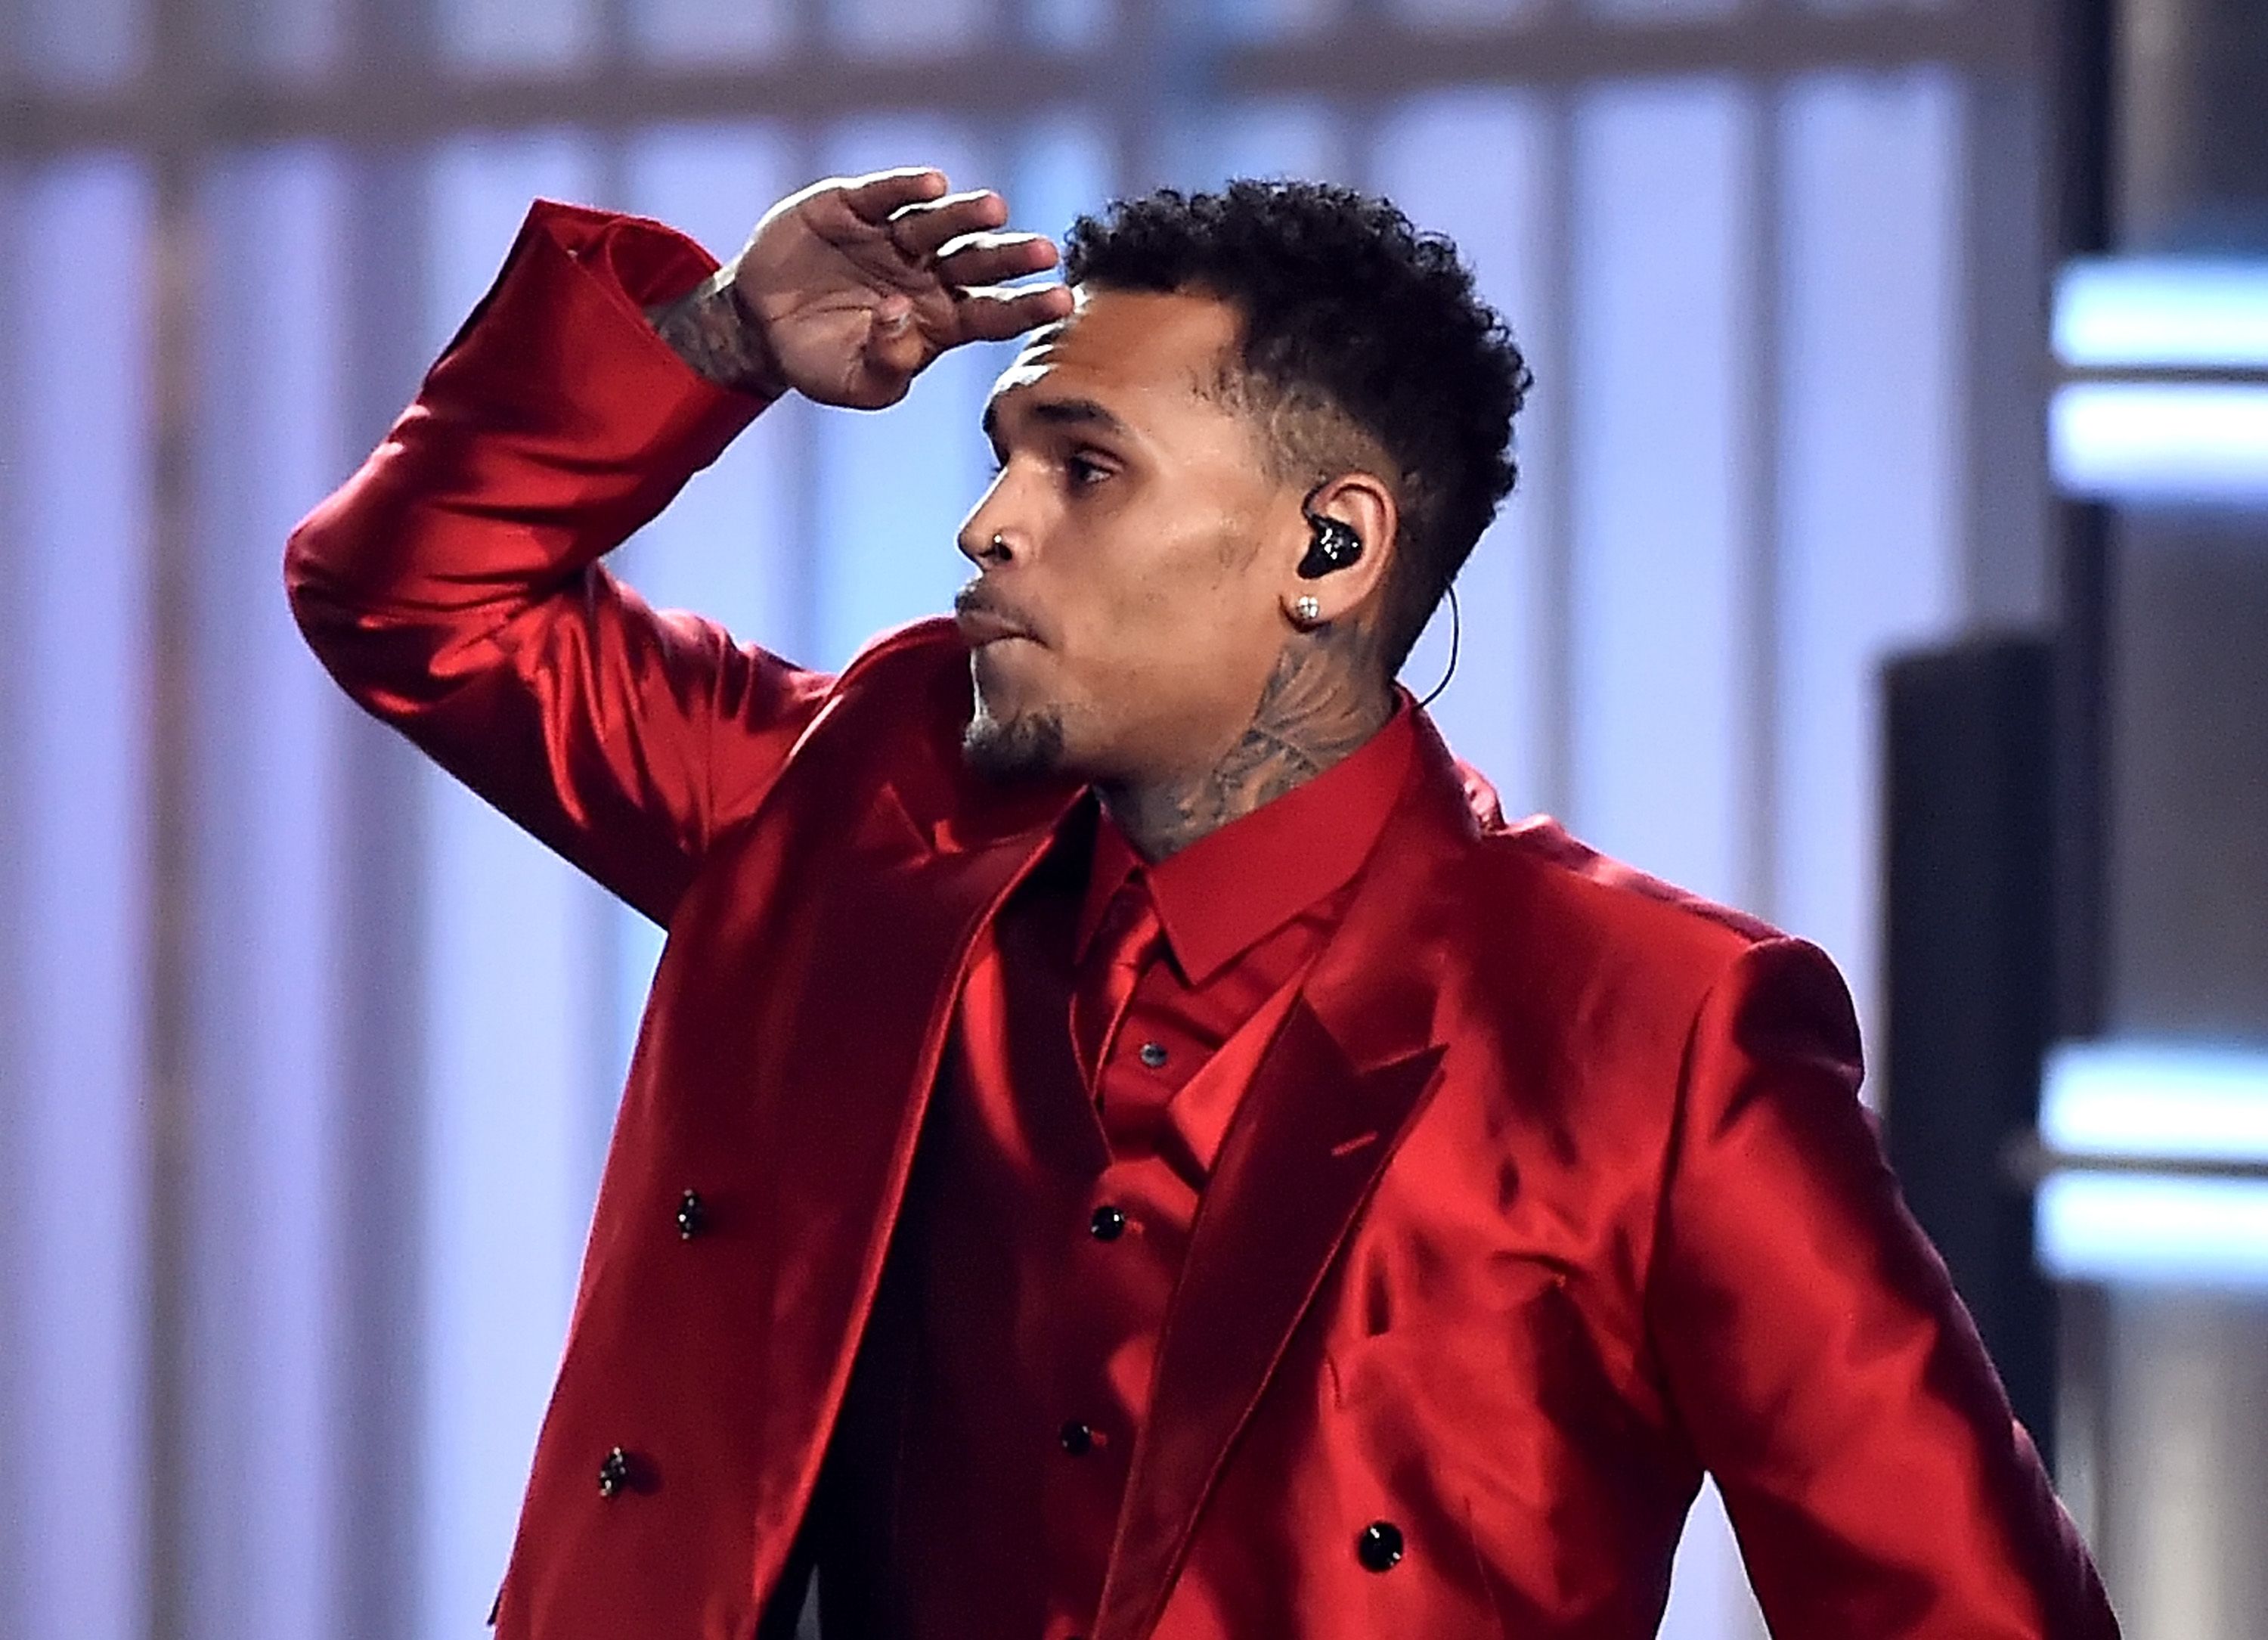 Chris Brown during the 2015 Billboard Music Awards at MGM Grand Garden Arena on May 17, 2015 in Las Vegas, Nevada. | Source: Getty Images